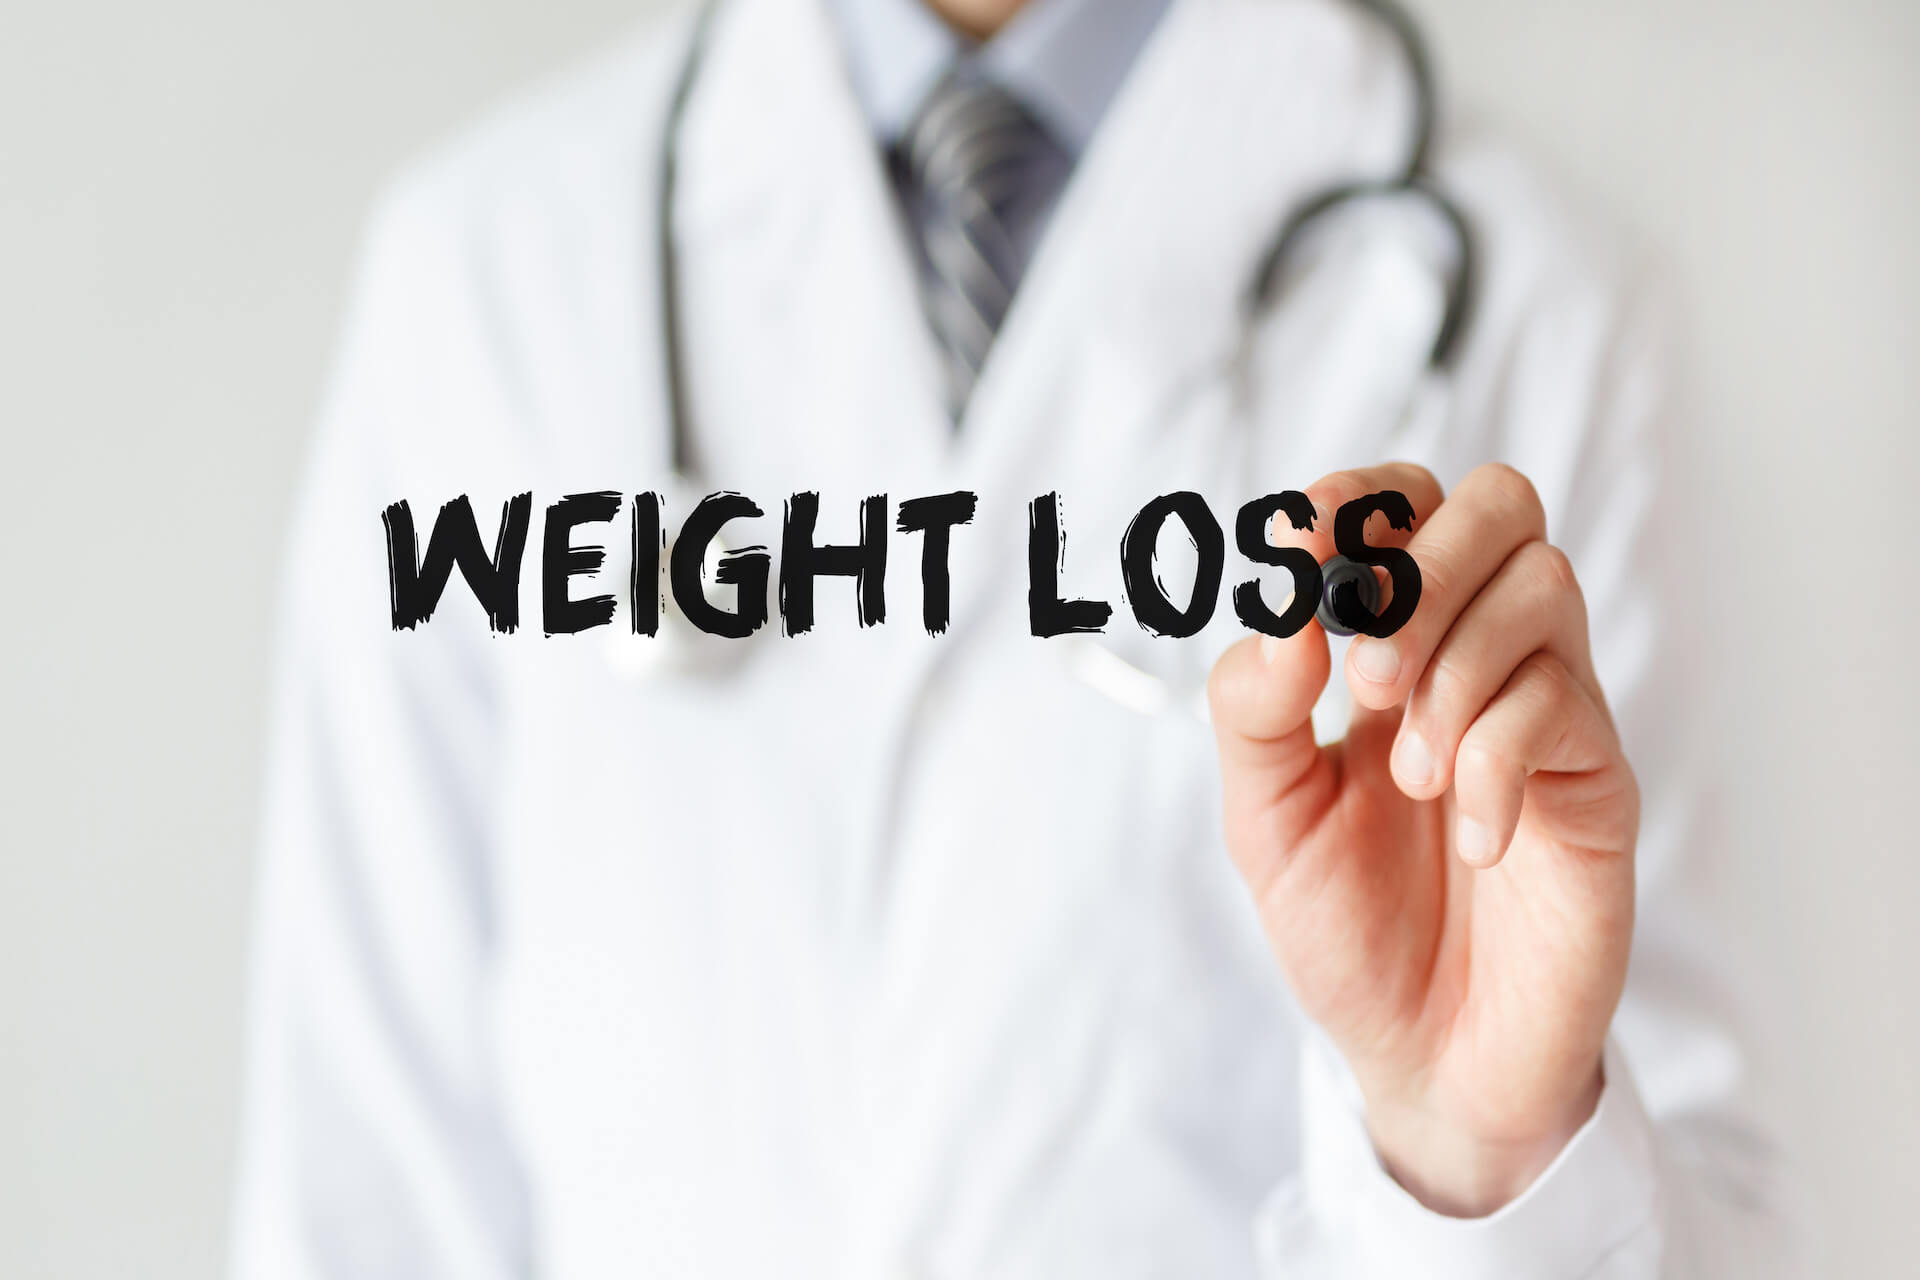 The James Clinic's Weight Loss Program